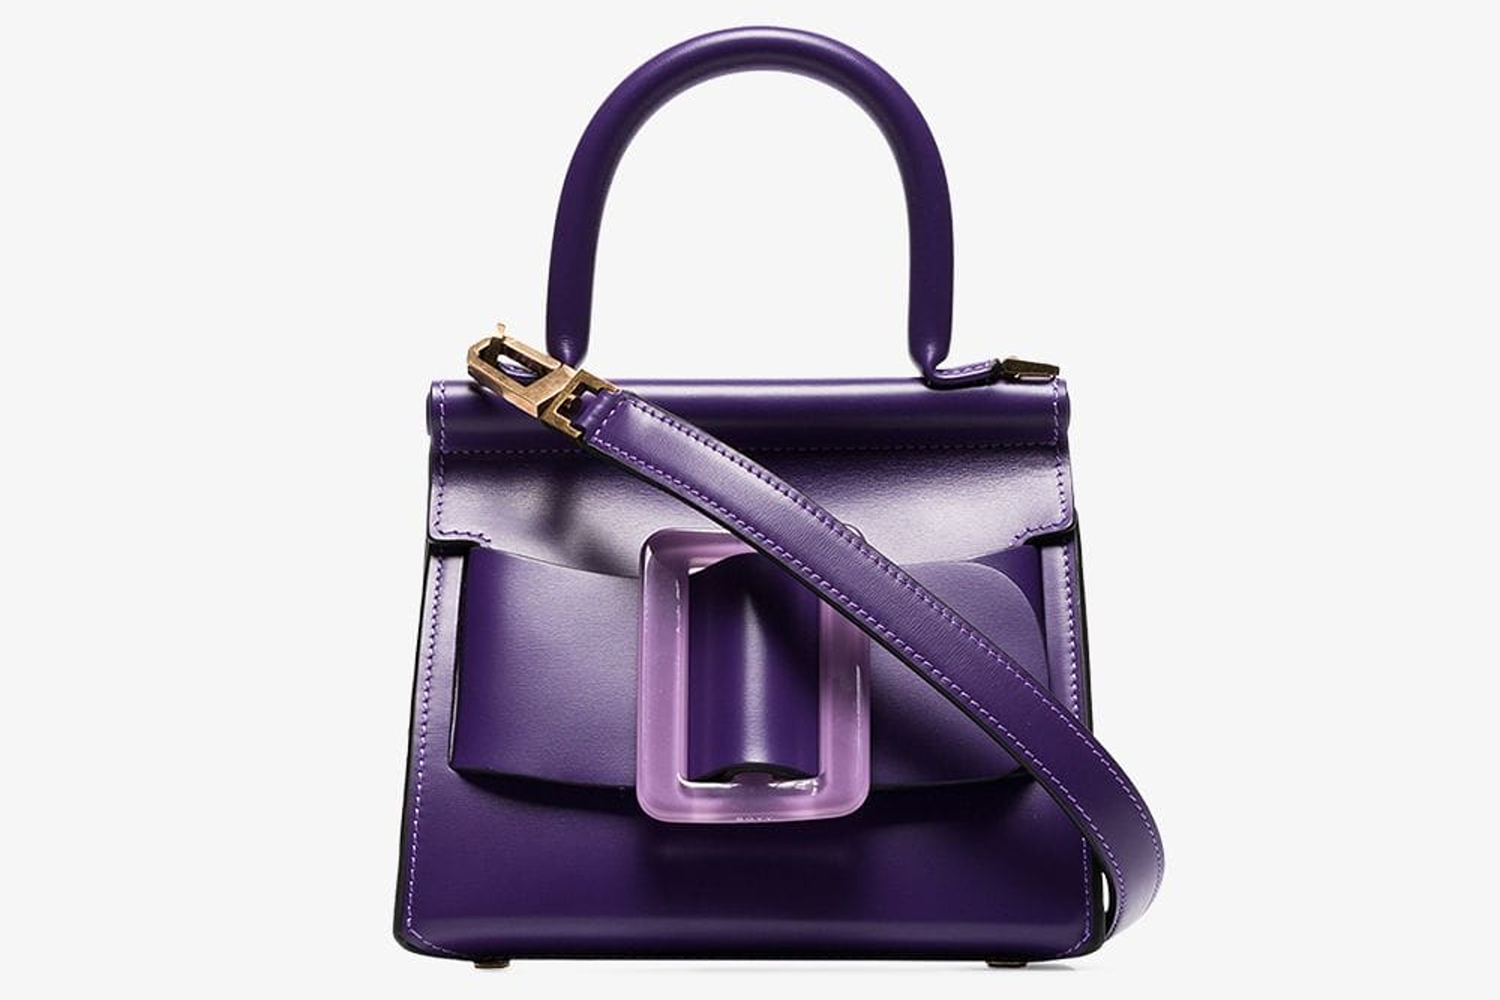 These are the best-selling designer handbags on Browns right now ...